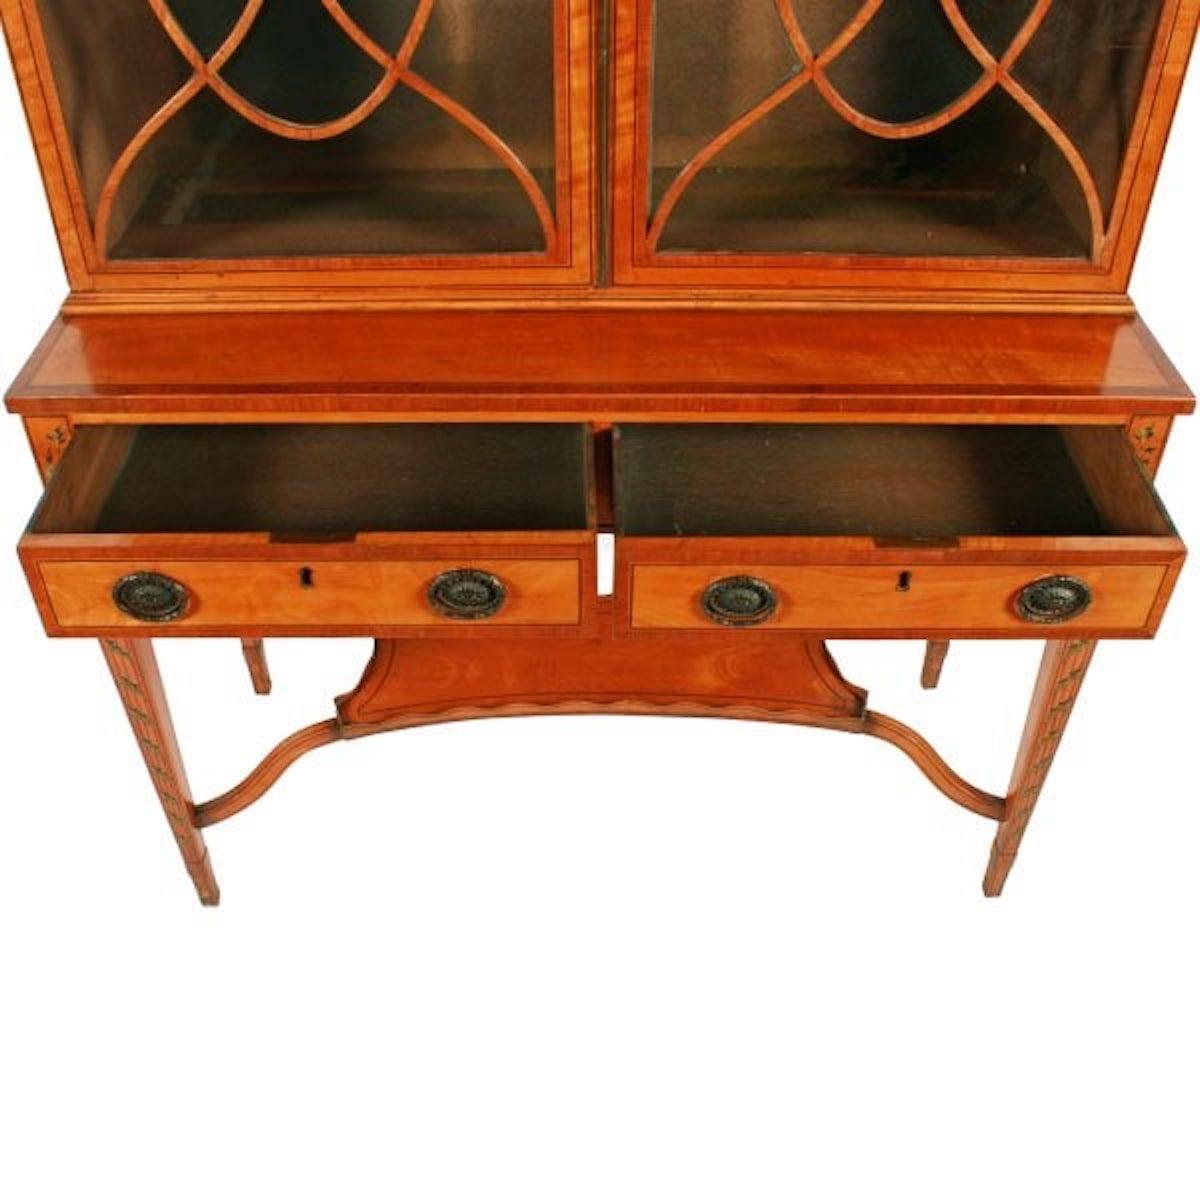 Georgian Painted Satinwood Cabinet, 19th Century For Sale 1